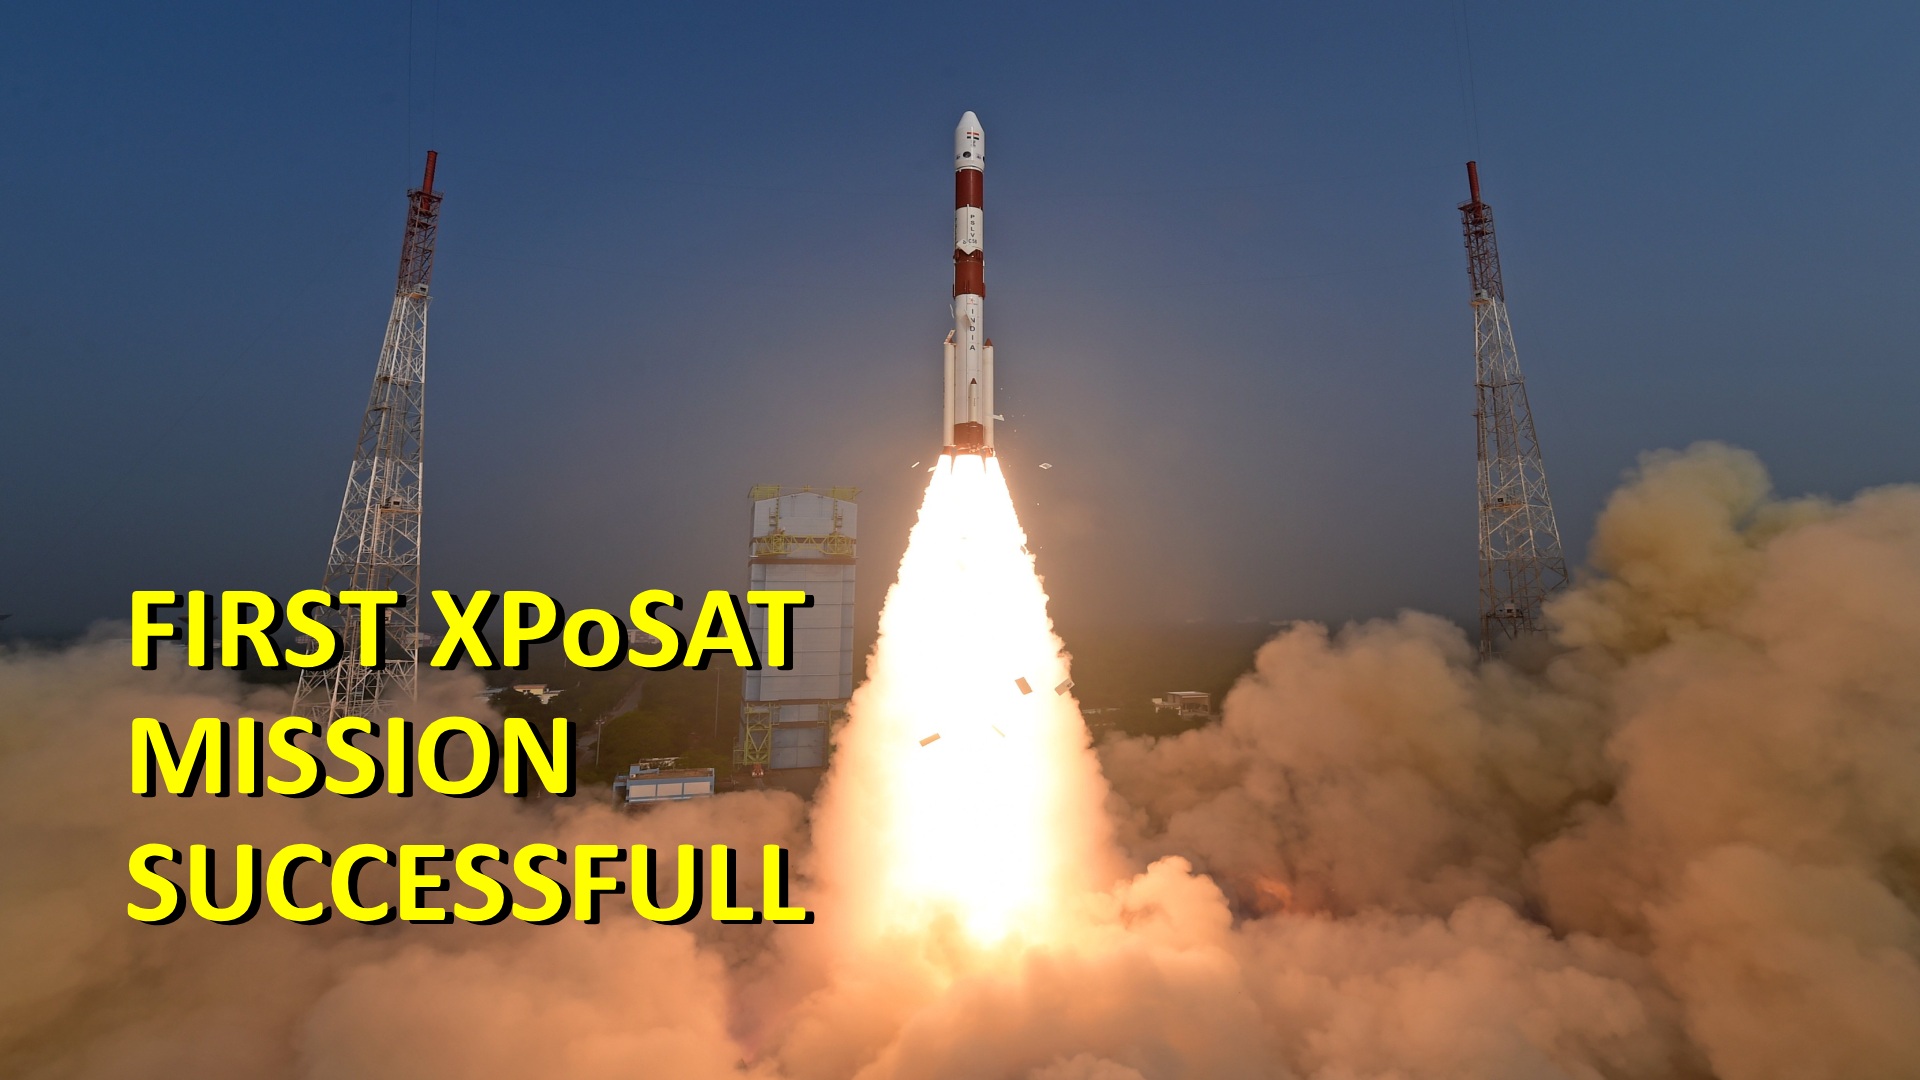 ISRO Successfully Launches its First XPoSAT Mission to Study Bright Astronomical Sources 